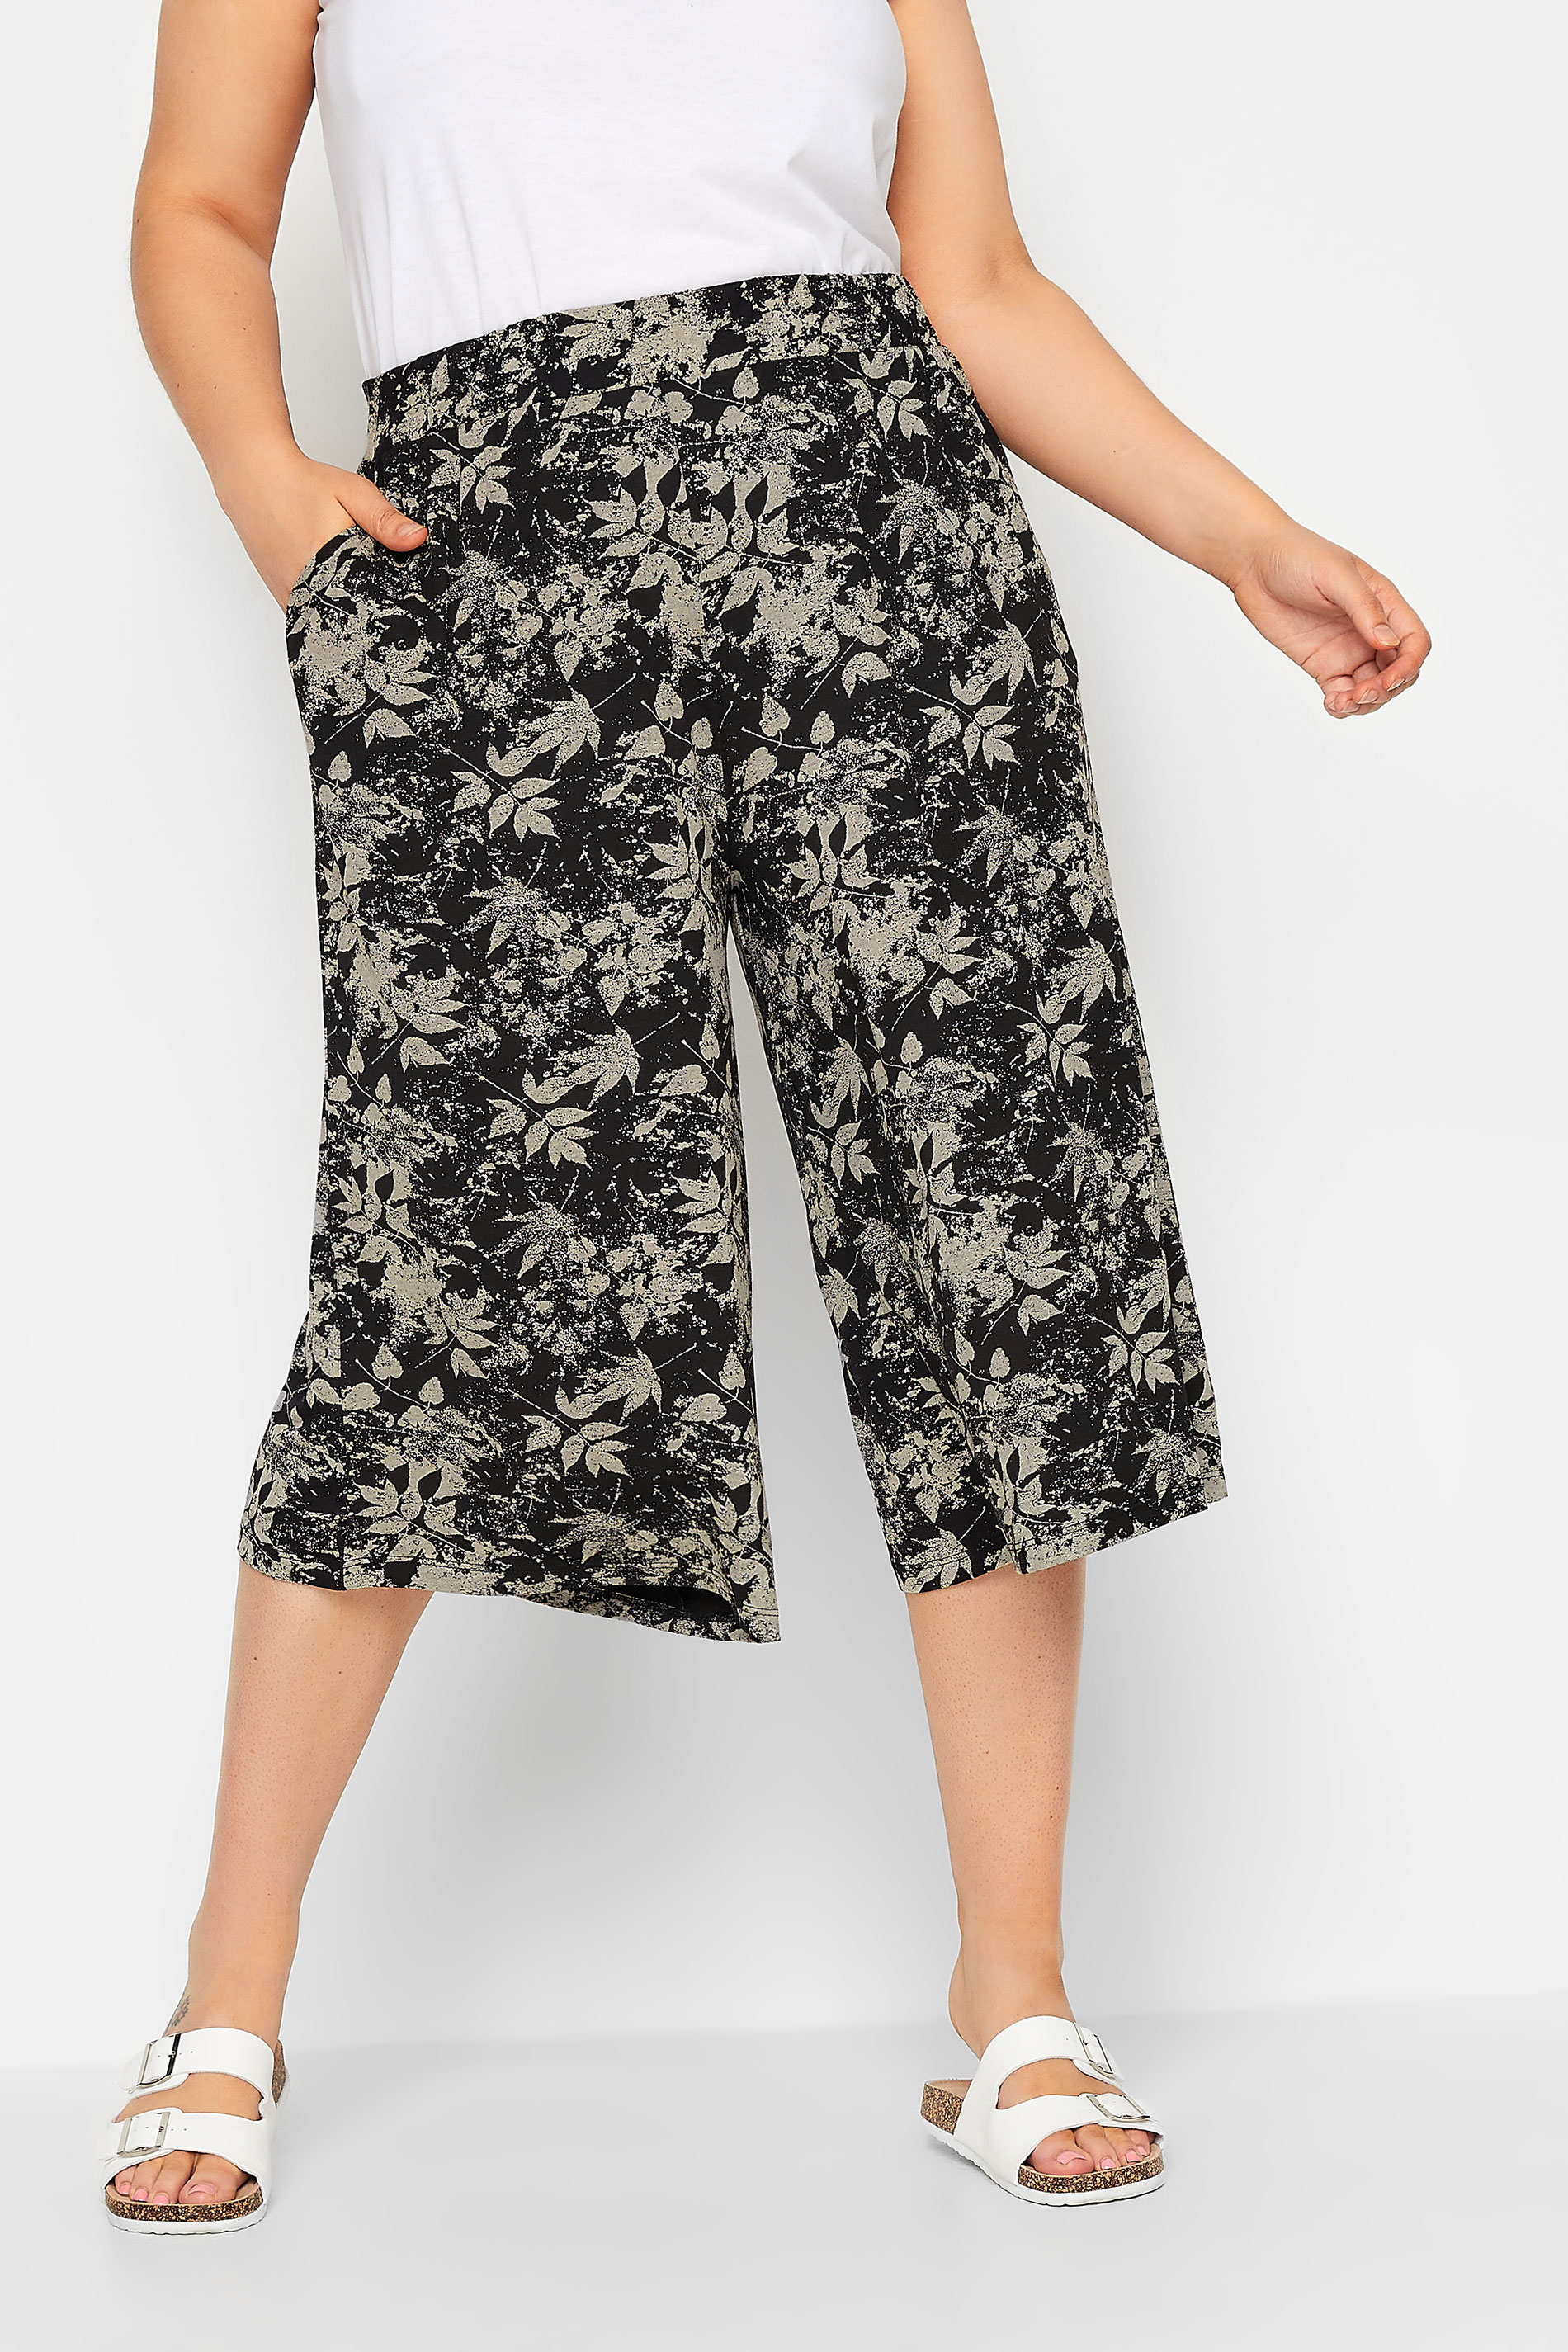 YOURS Curve Black Mixed Leaf Print Culottes | Yours Clothing 1